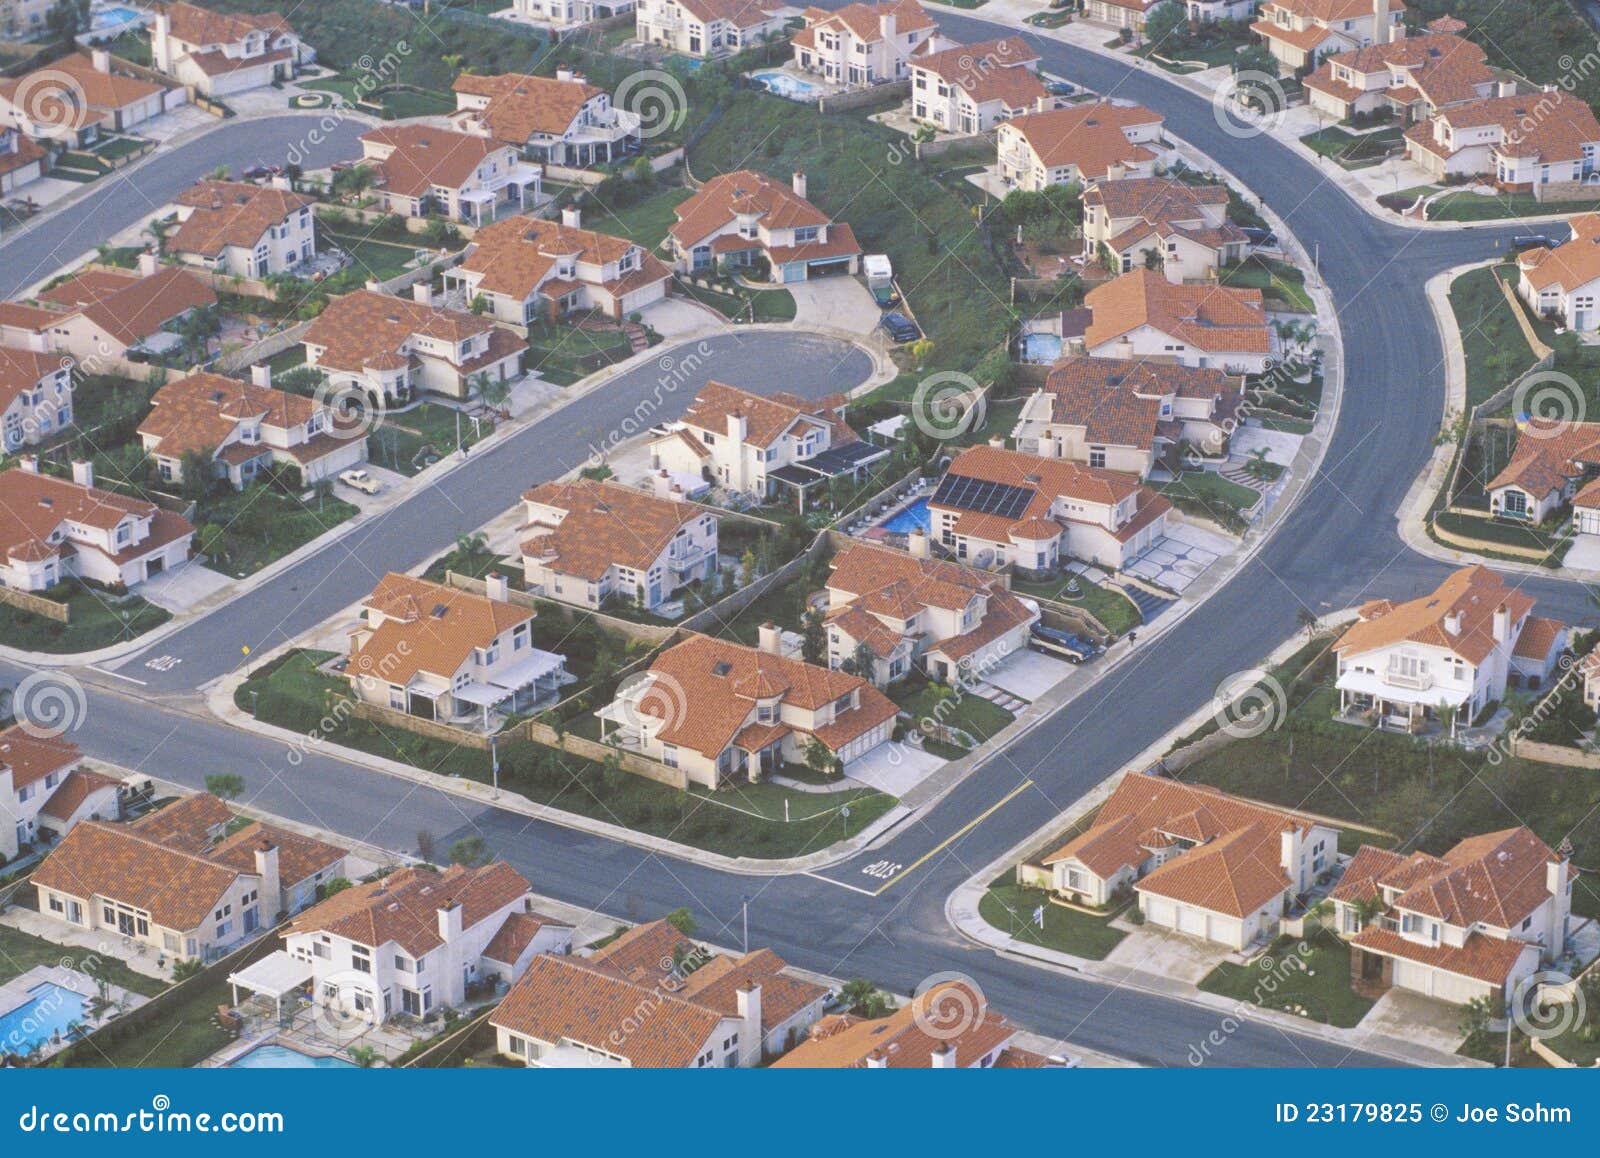 aerial view of orange county suburbs,